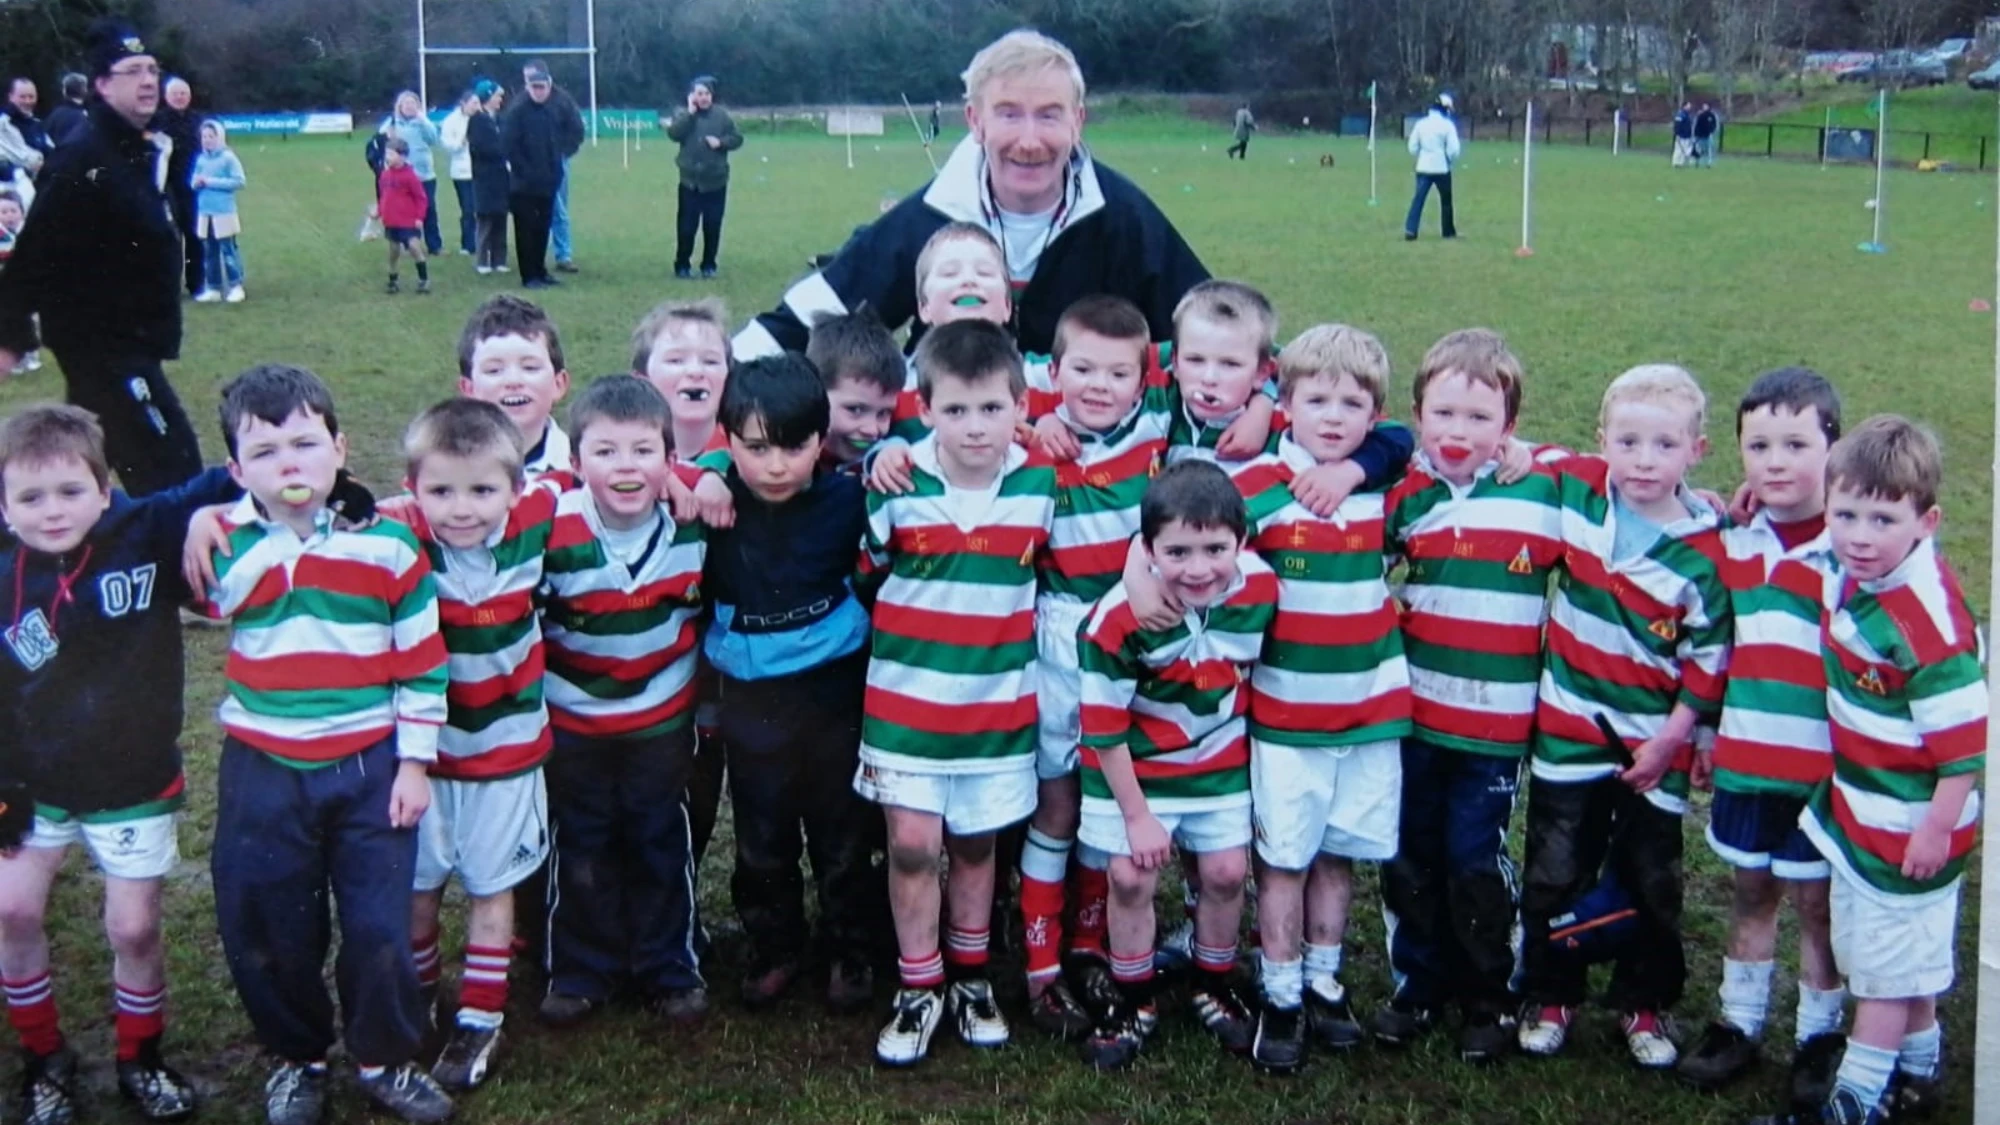 Dan (centre front) and Bobby (right) at Bective Rangers 2000